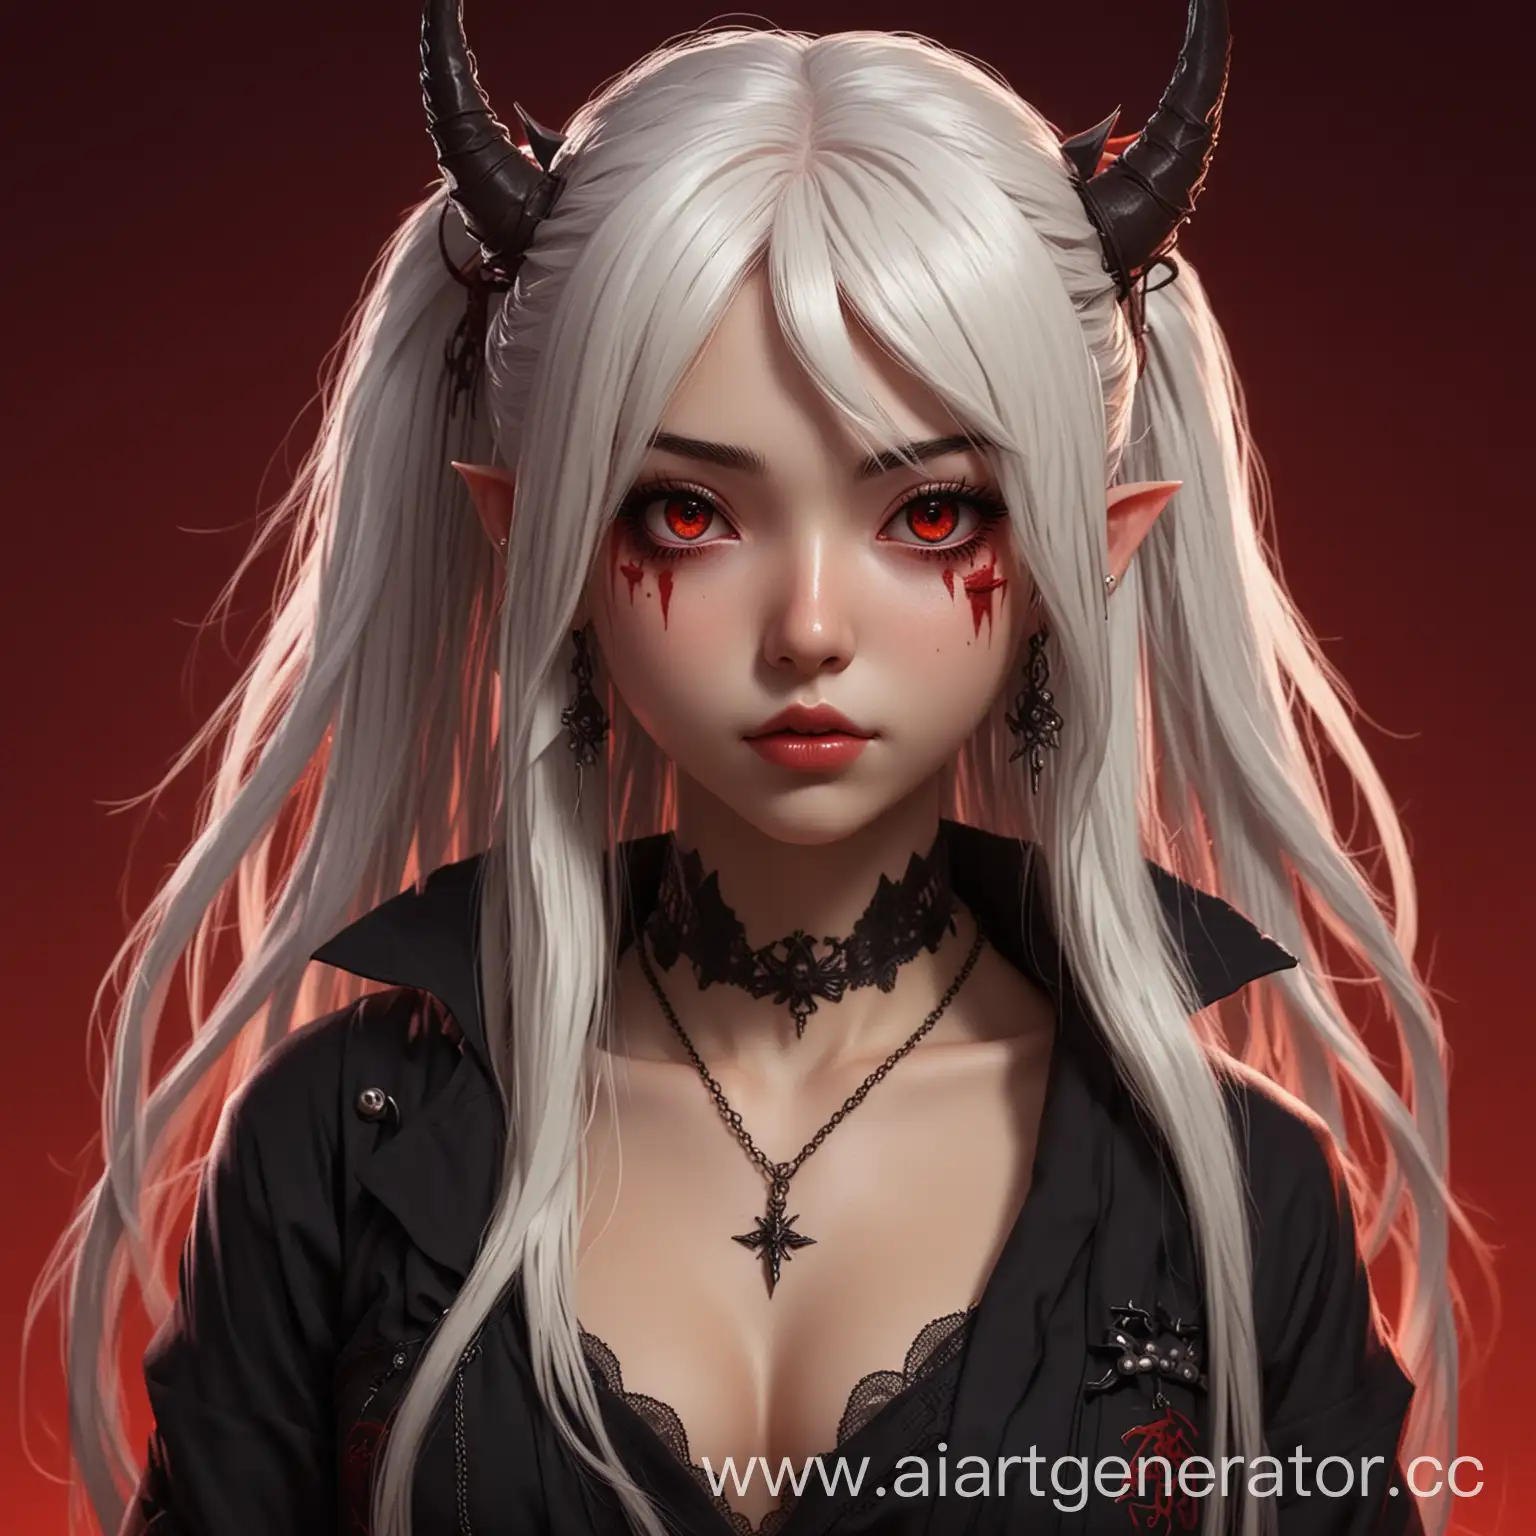 Sinister-Anime-Girl-Dark-Atmosphere-with-Glowing-Red-Eyes-and-Tattoos